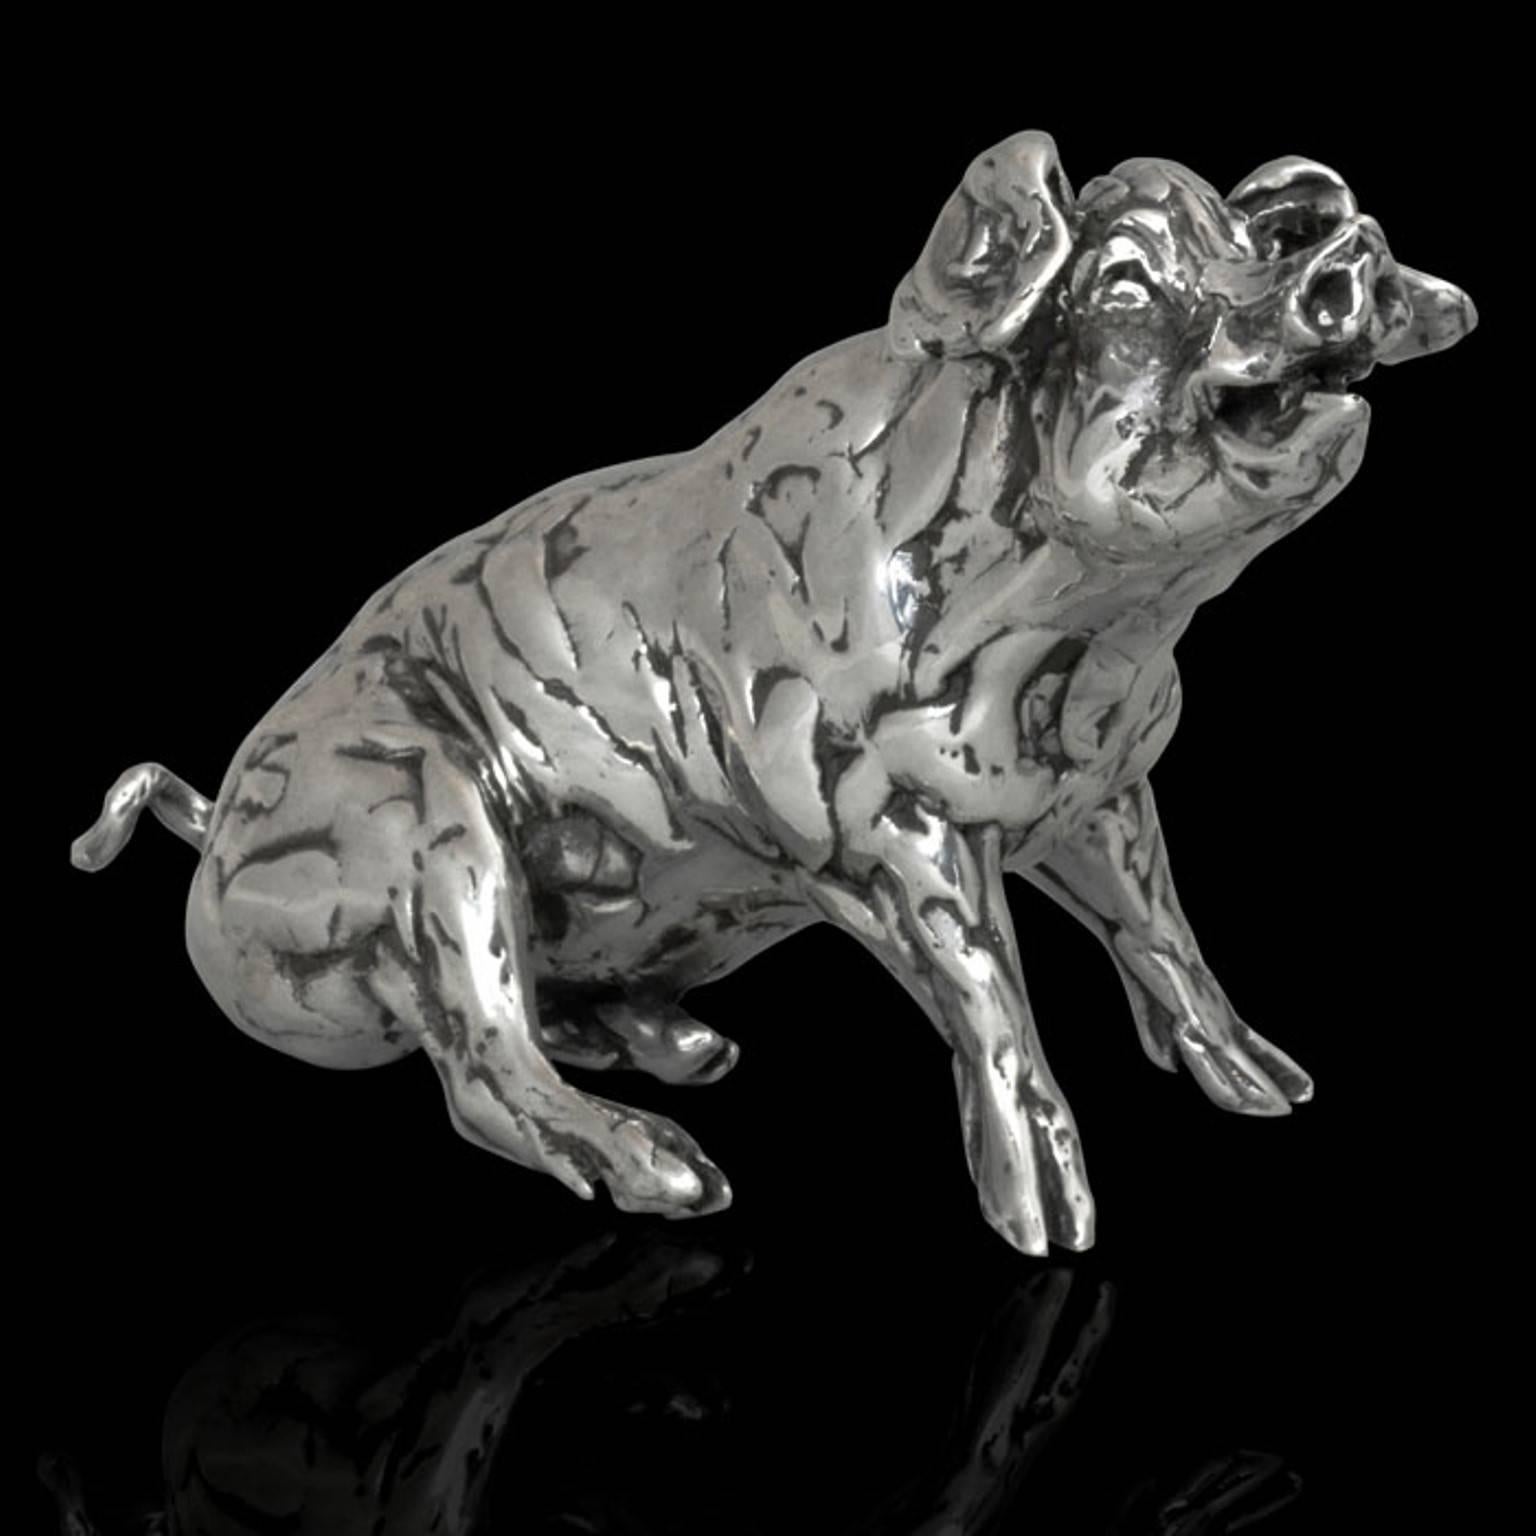 Lucy Kinsella Figurative Sculpture - 'Seated Pig' Sterling Silver Limited Edition Sculpture by Lucy Linsella